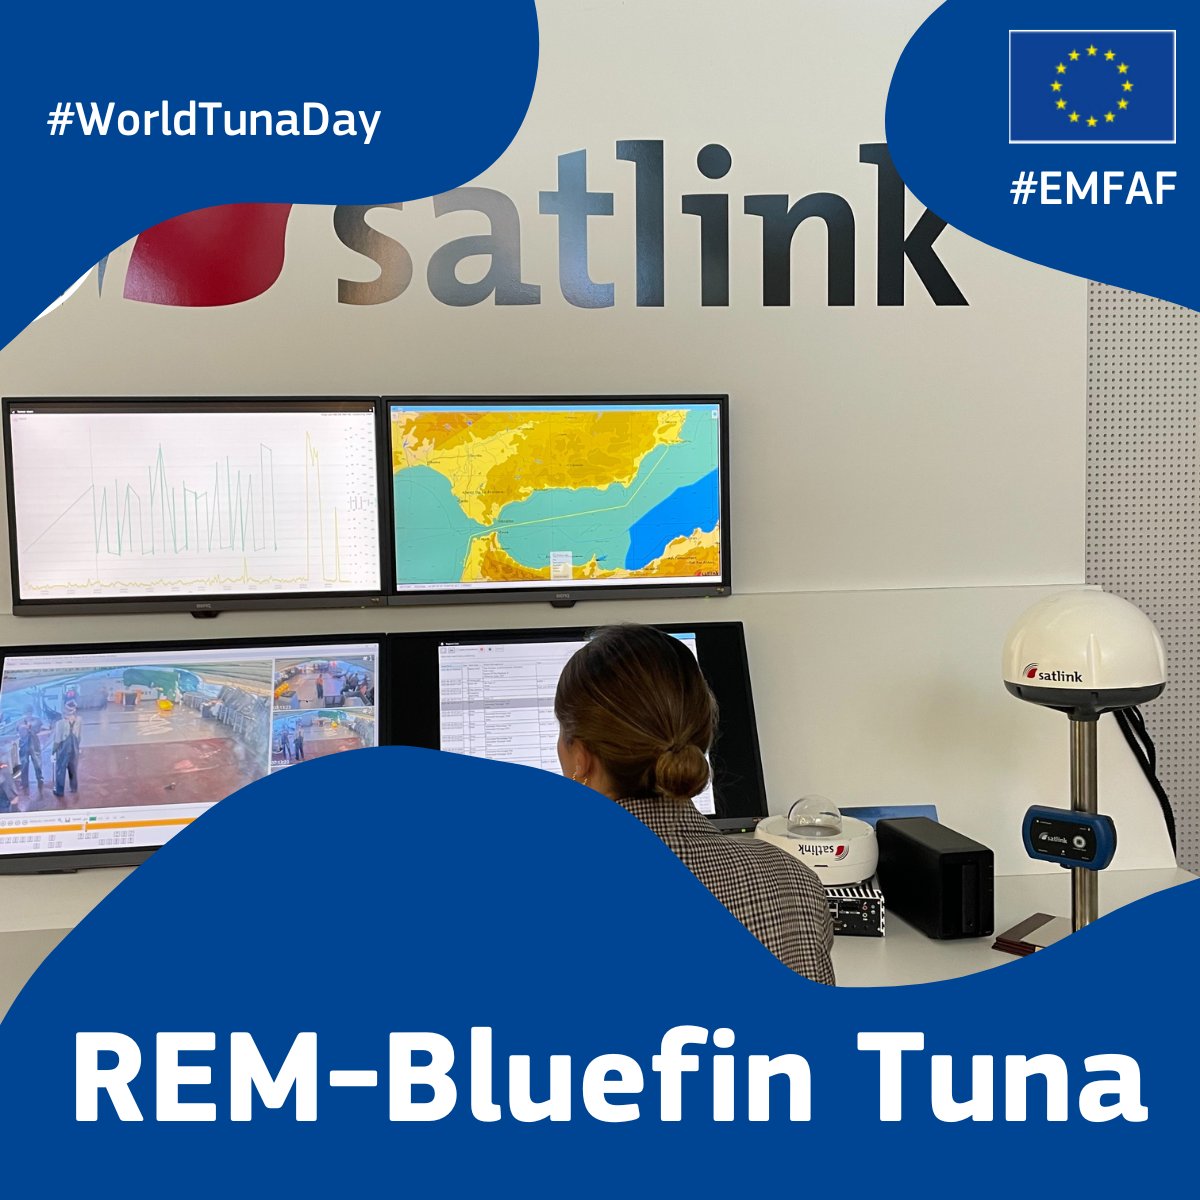 On #WorldTunaDay find out how #EU #EMFAF REM-BFT can improve control practices of bluefin tuna🐟 The project is testing the use of a Remote Electronic Monitoring system on bluefin tuna processing vessels to enhance transparency in fisheries management👇 europa.eu/!fDX3fp